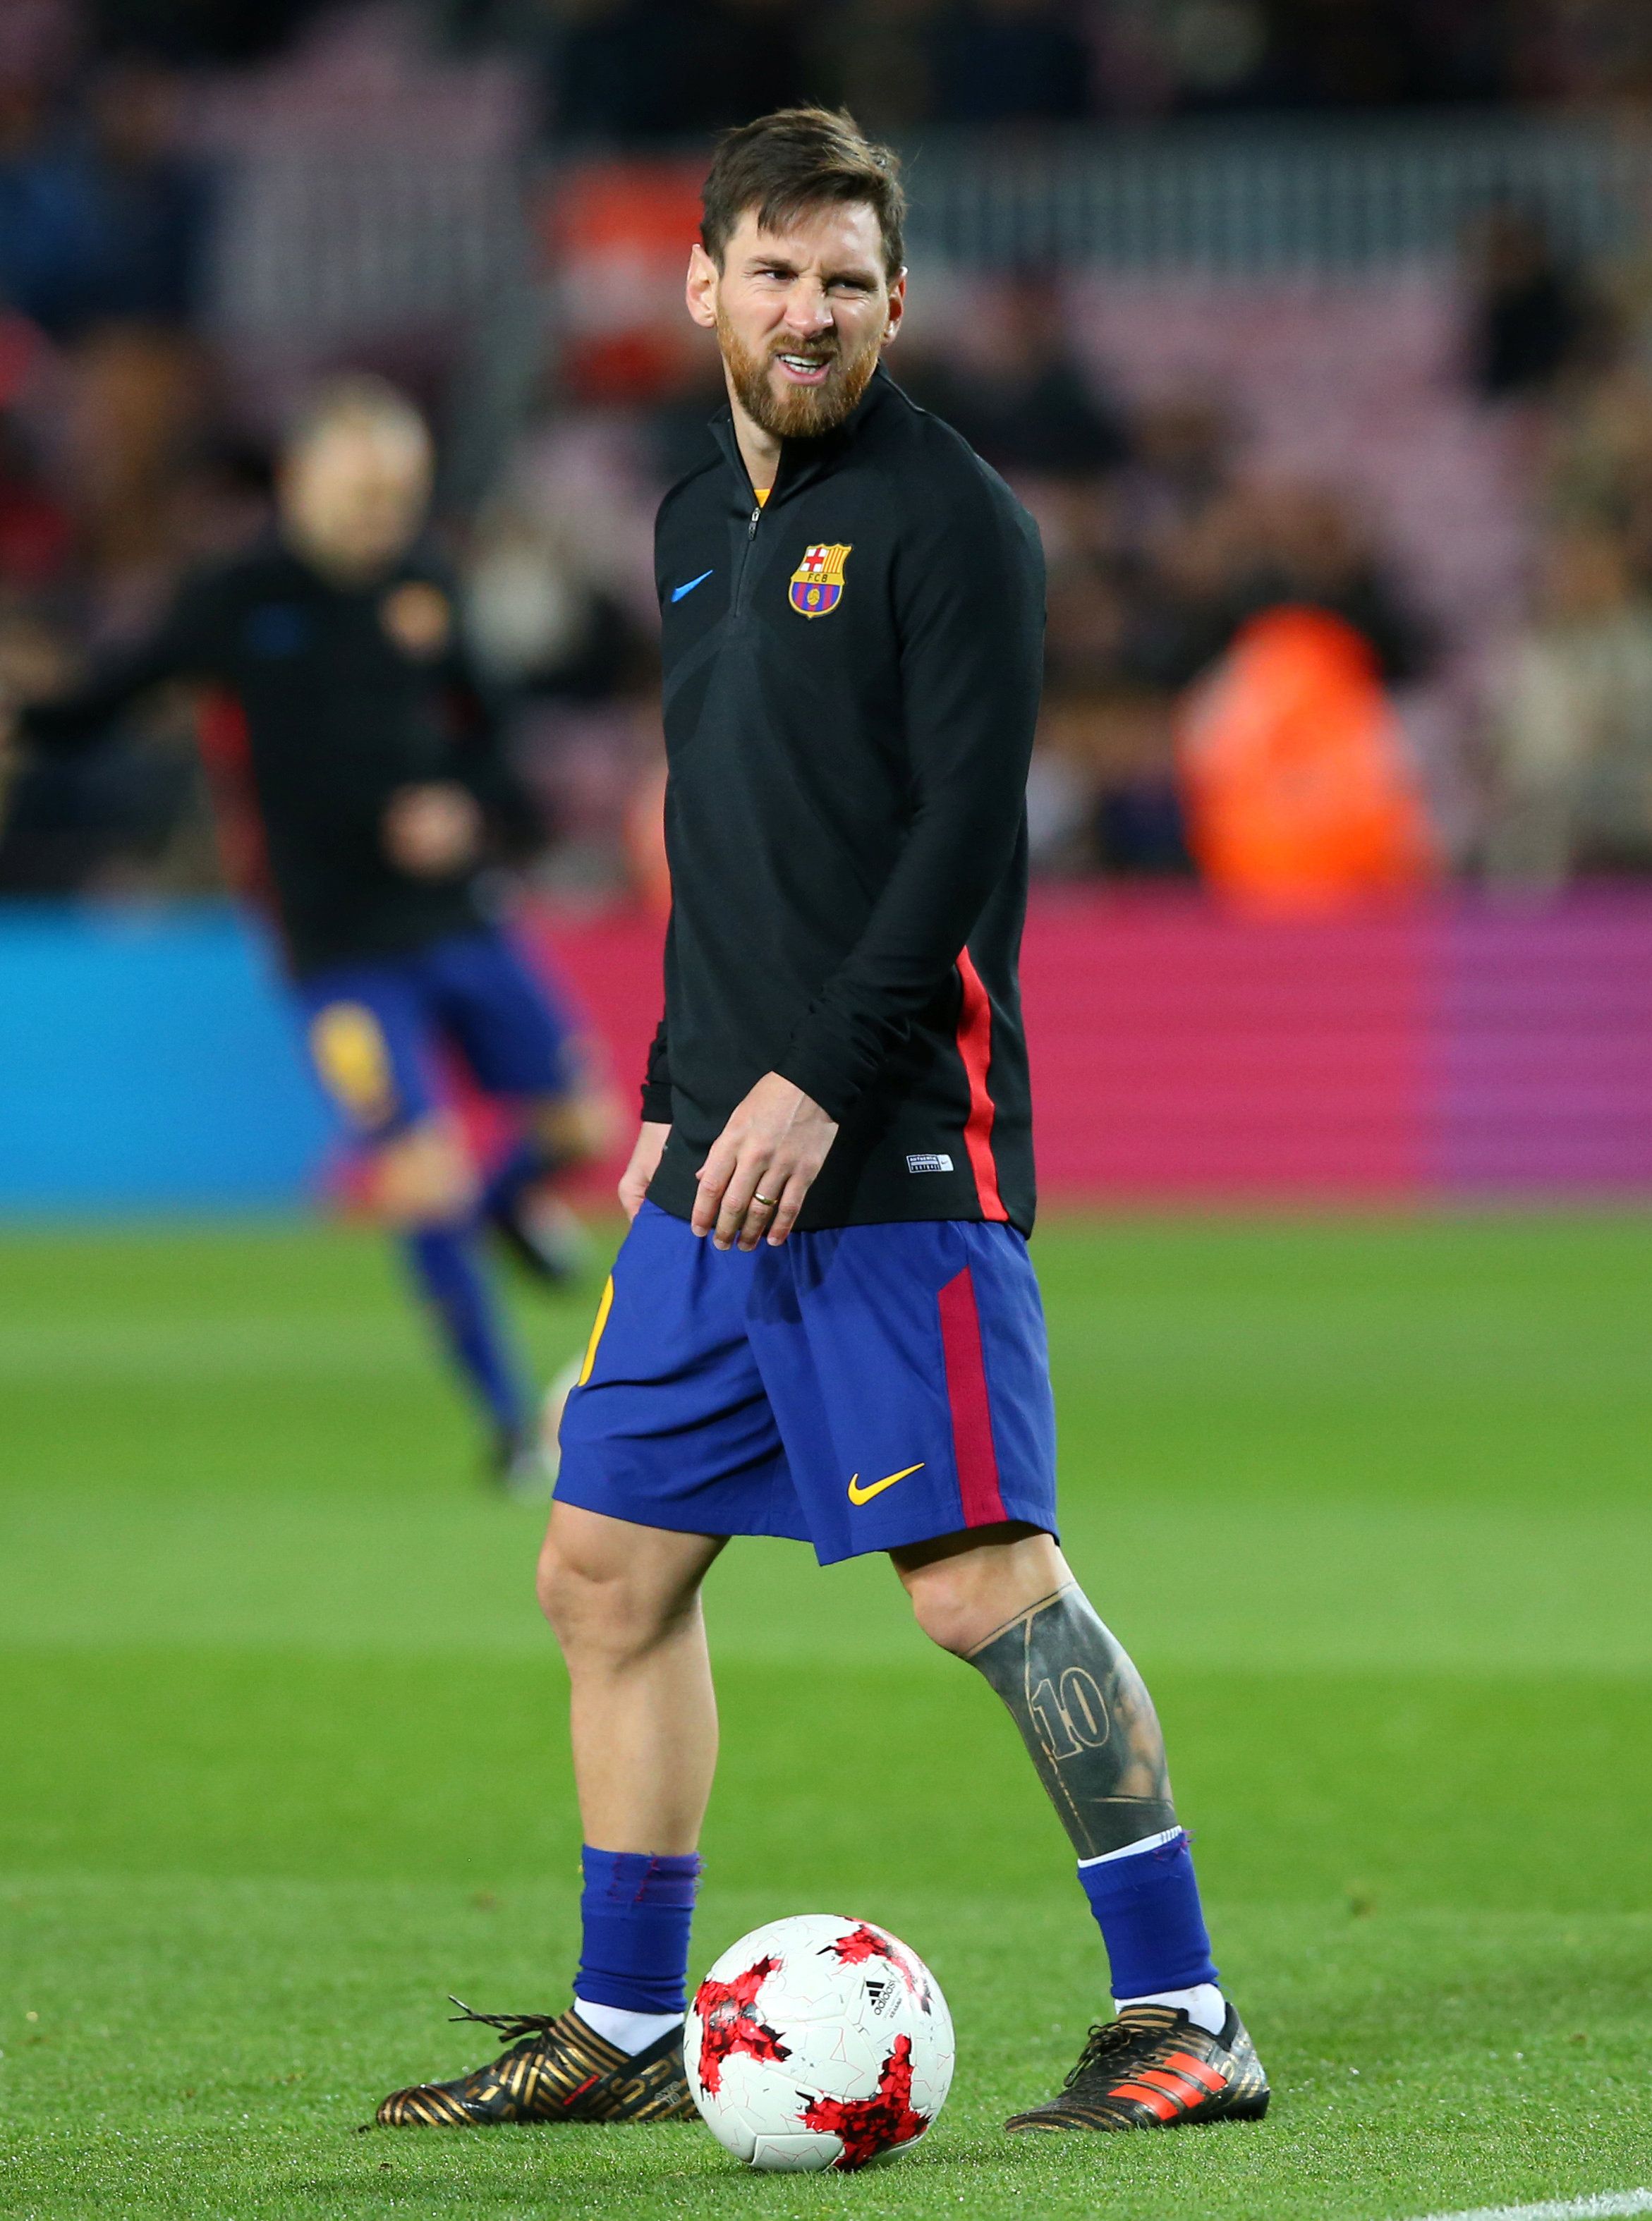 Messi warms up for Barcelona.